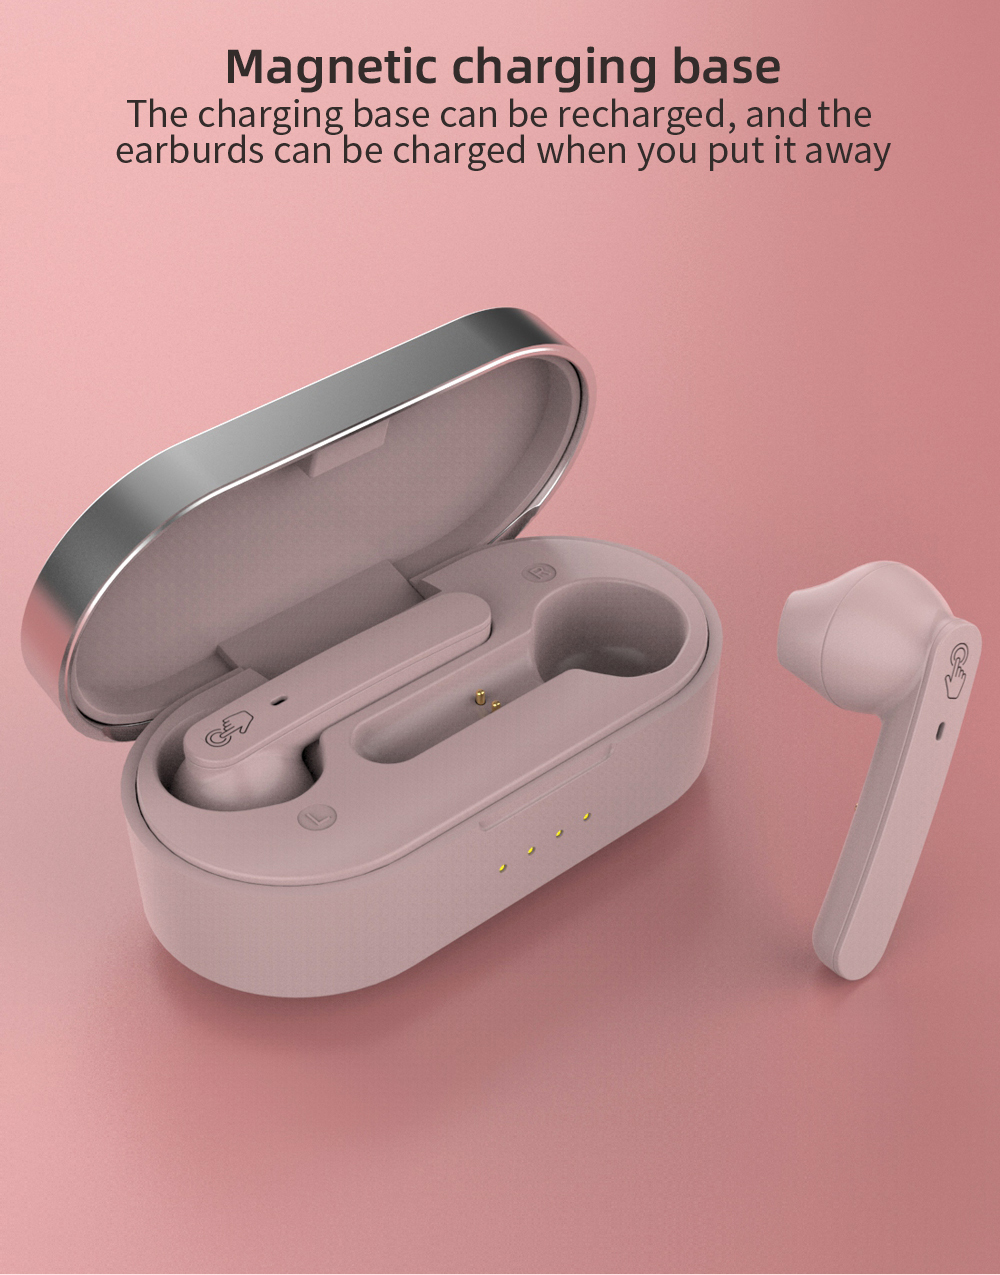 Bakeey-TWS-09-Touch-Control-bluetooth-50-Earbuds-TWS-Wireless-Stereo-Binaural-Call-In-ear-Earphone-H-1669610-8